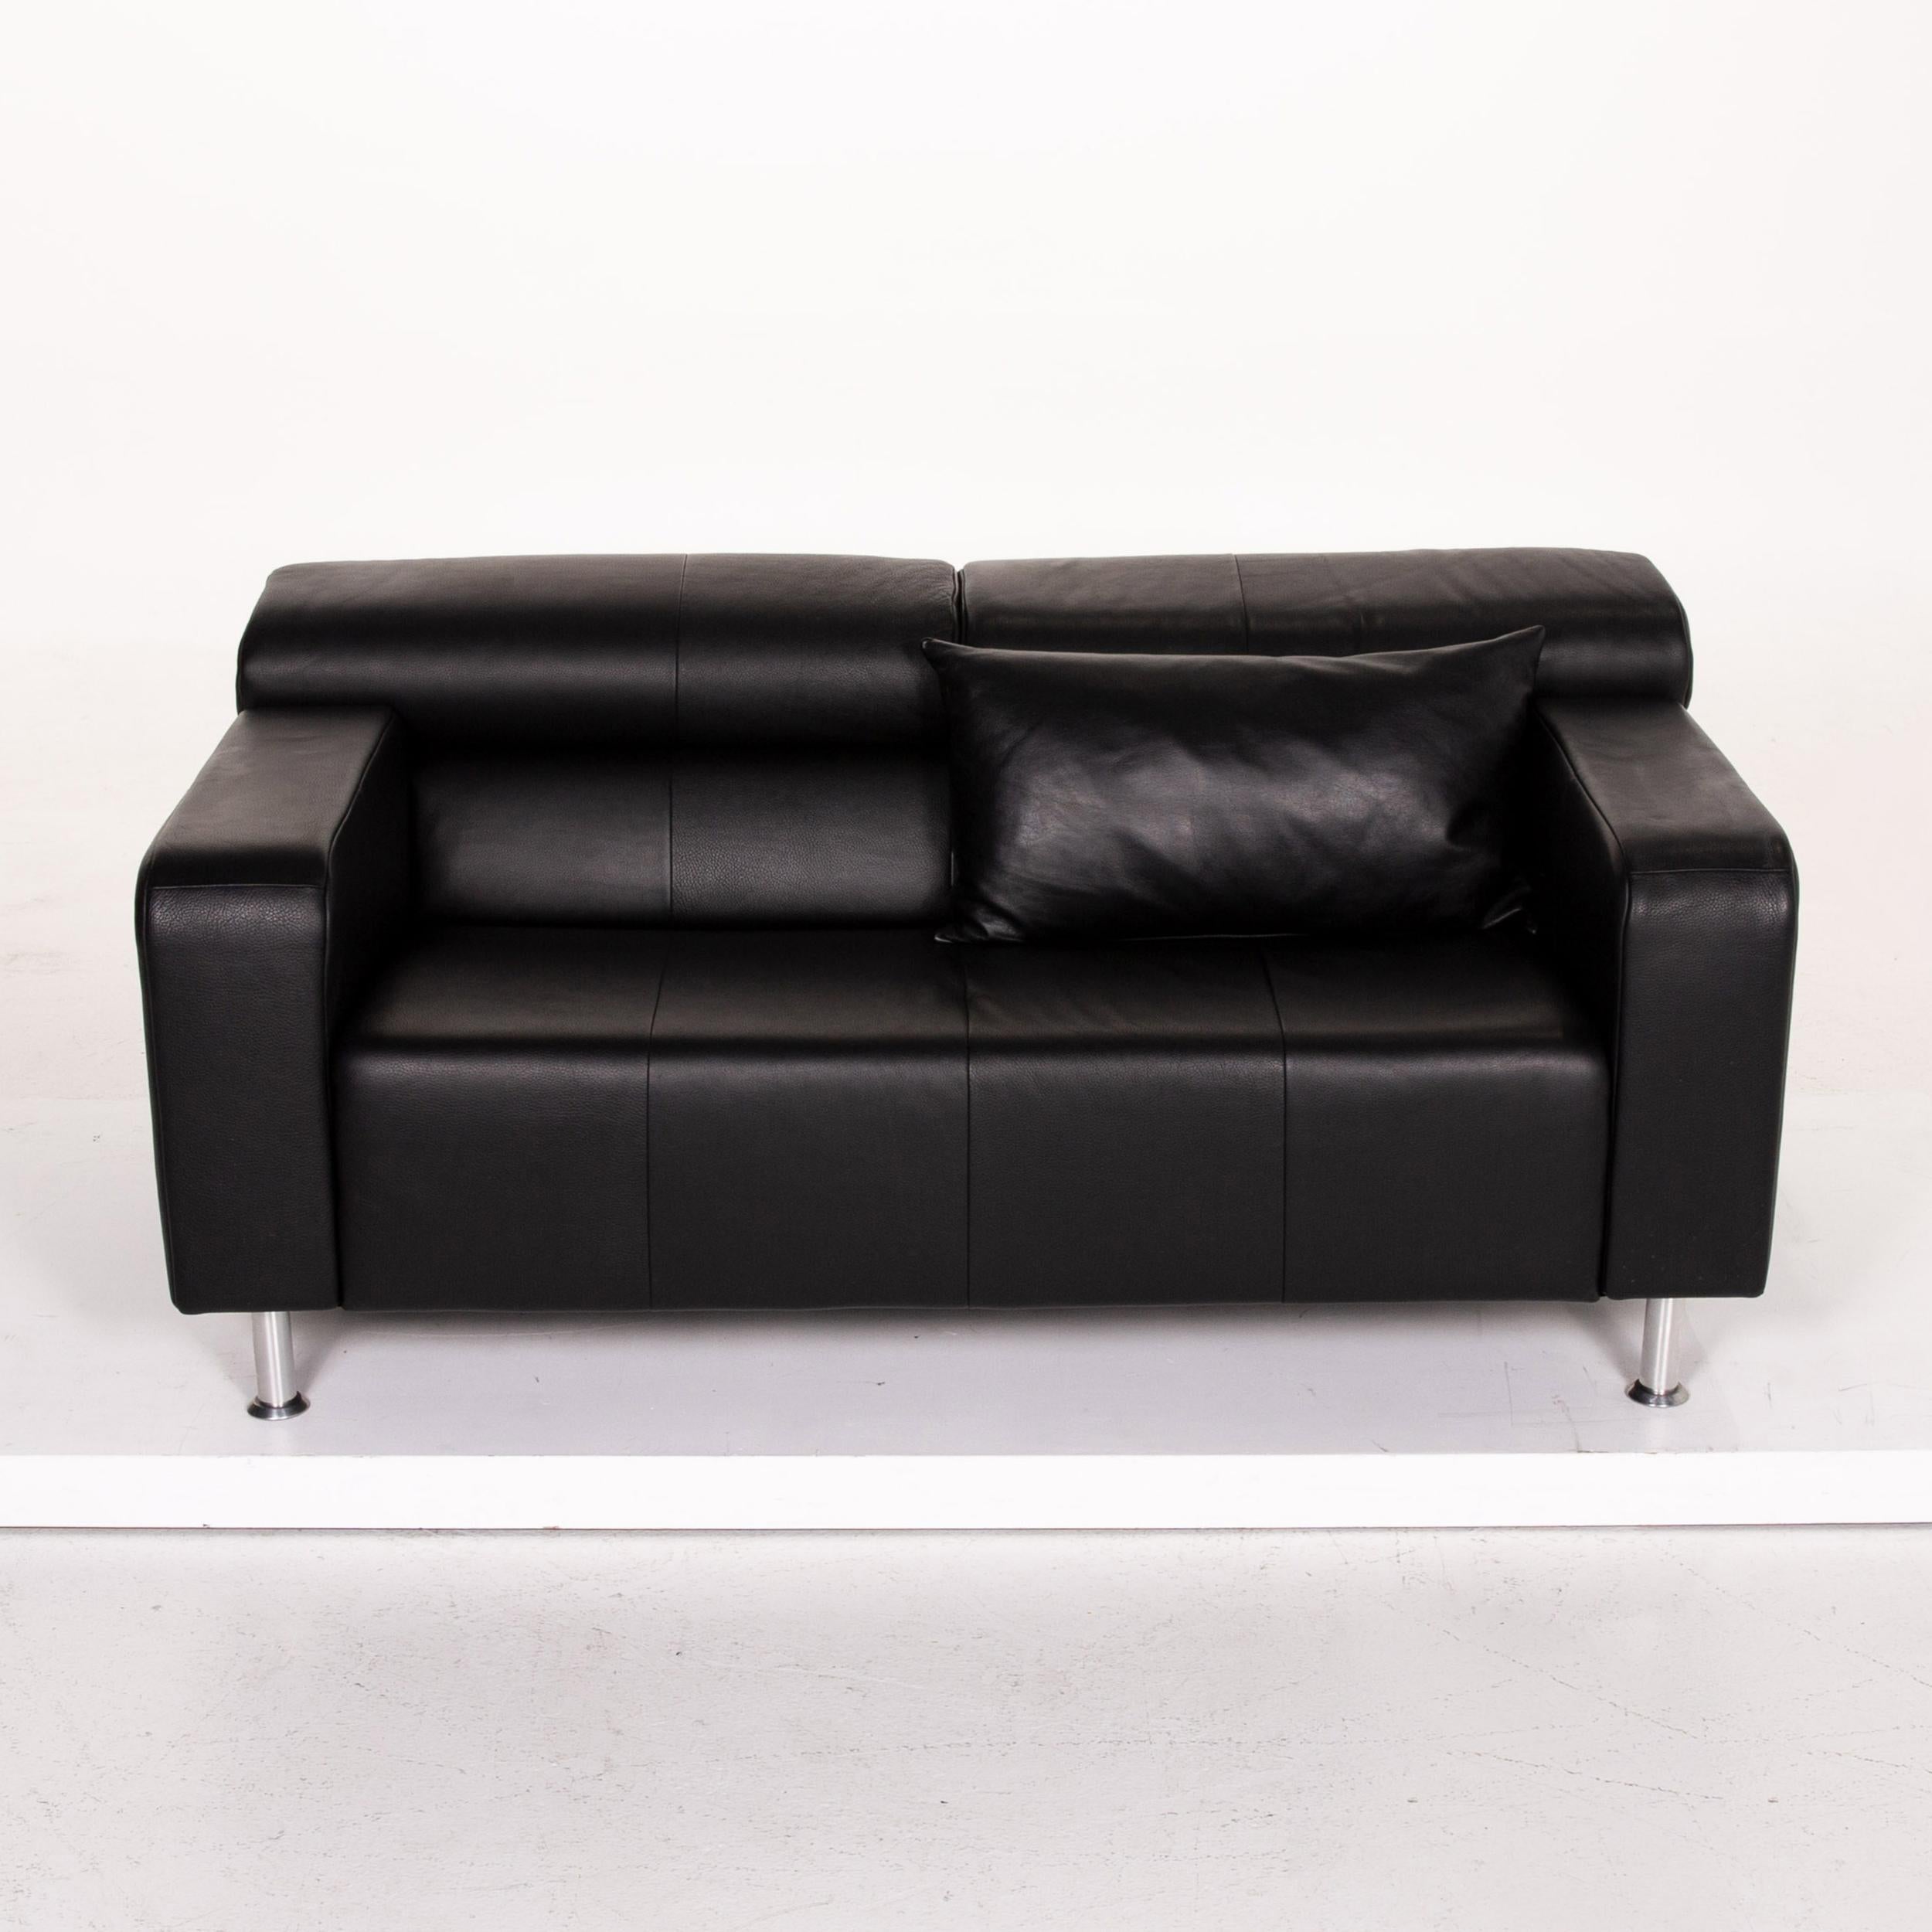 Rolf Benz AK 422 Leather Sofa Black Three-Seat Couch For Sale 9